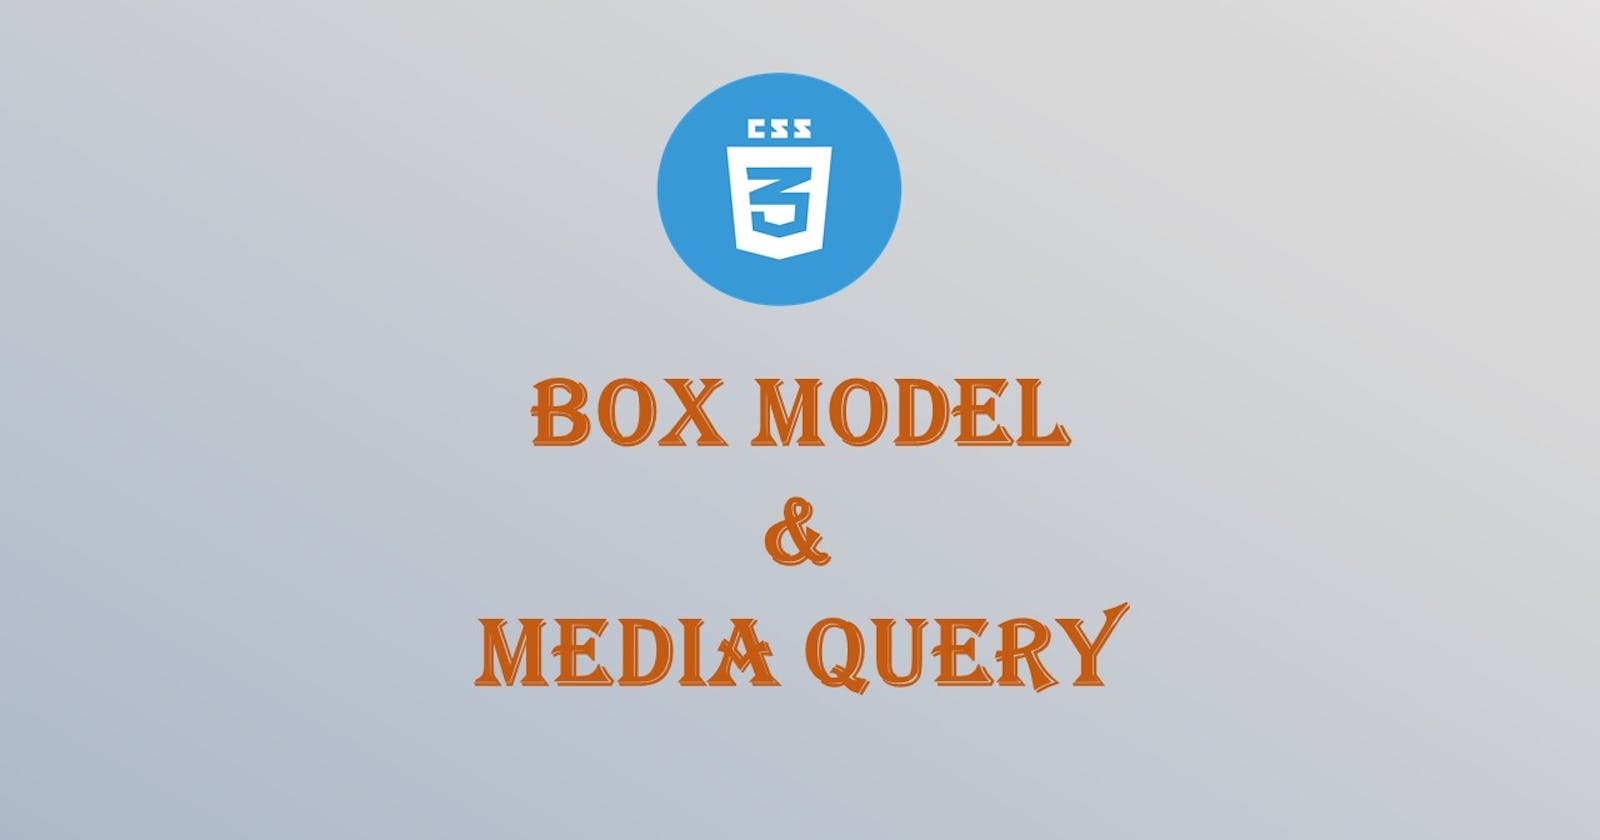 A Note on CSS - Box Model & Media Query